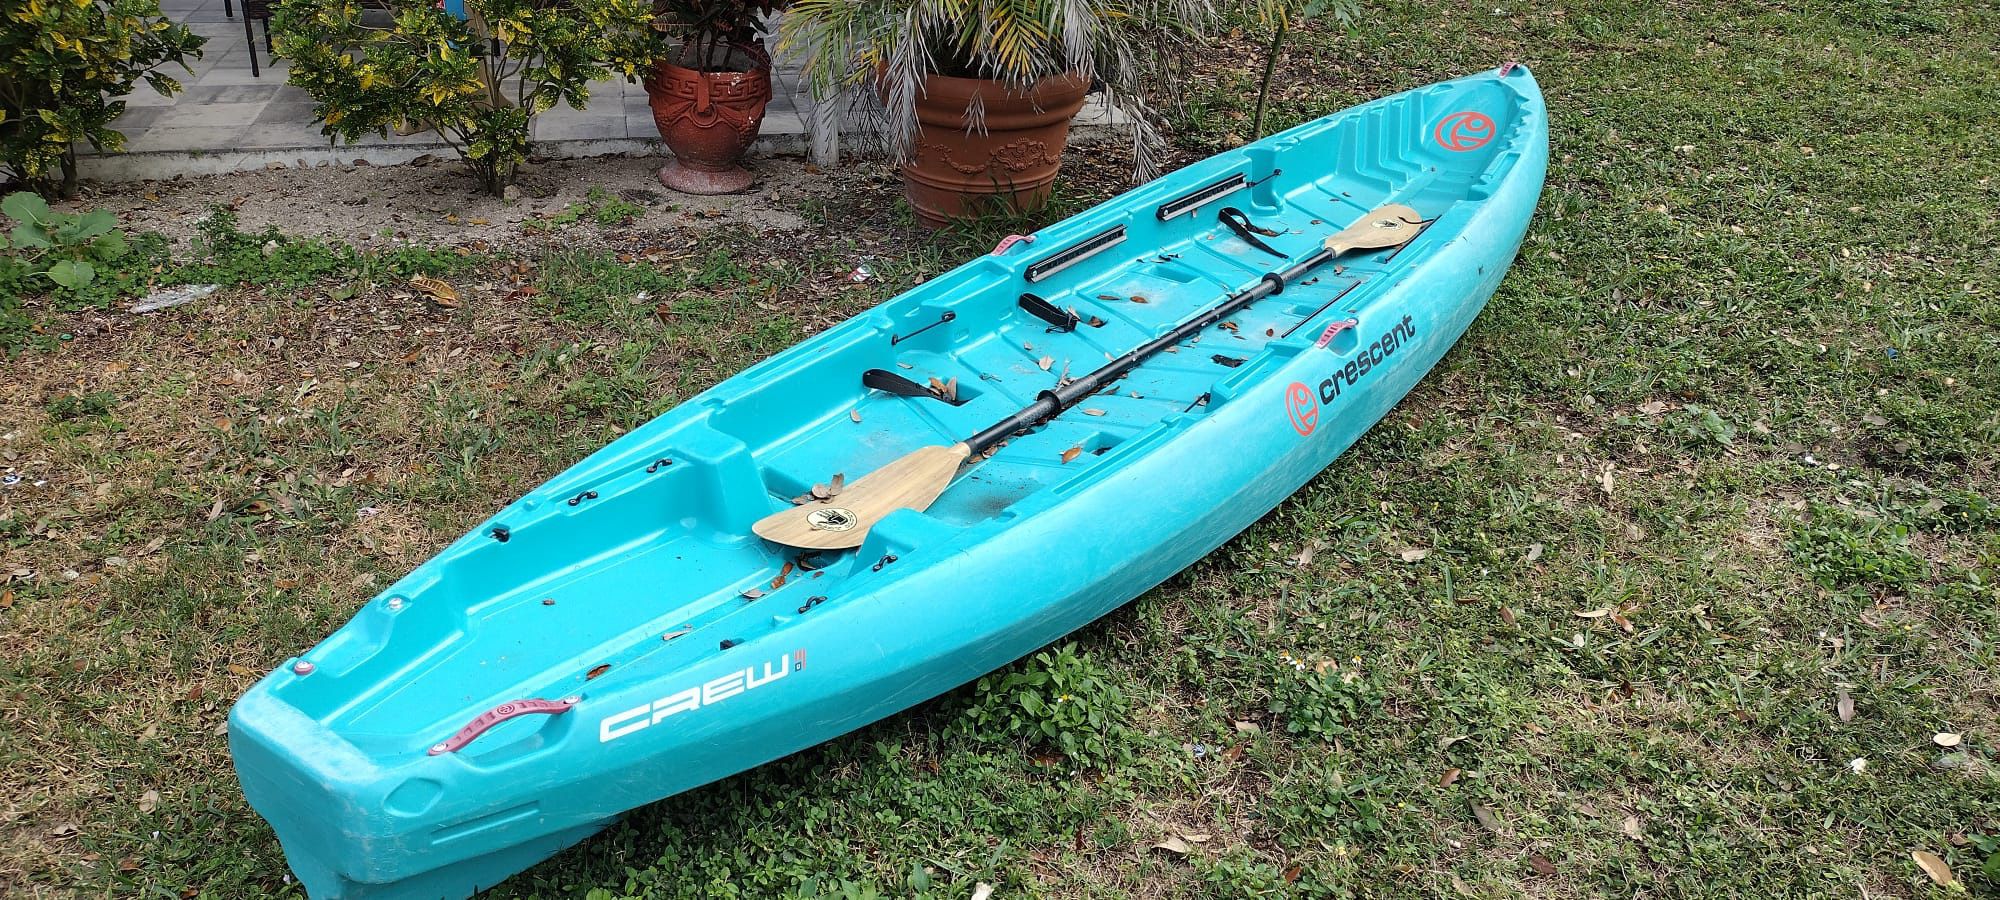 Kayak It’s Use Perfect Condition 